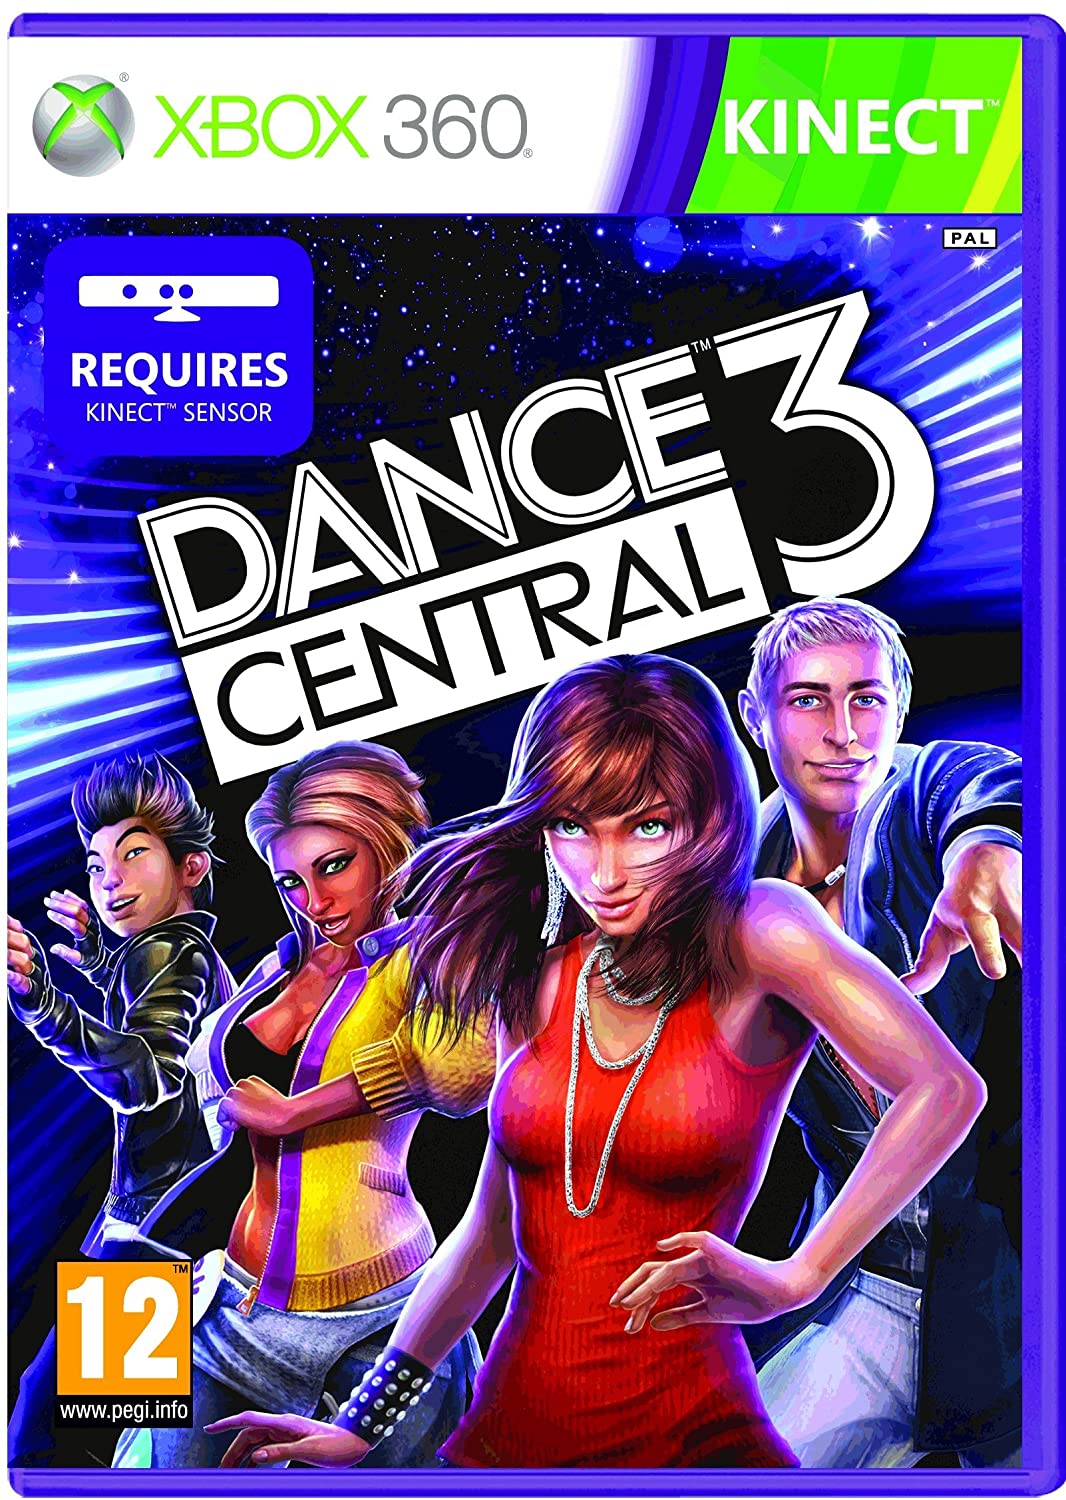 Dance Central 3 player count stats